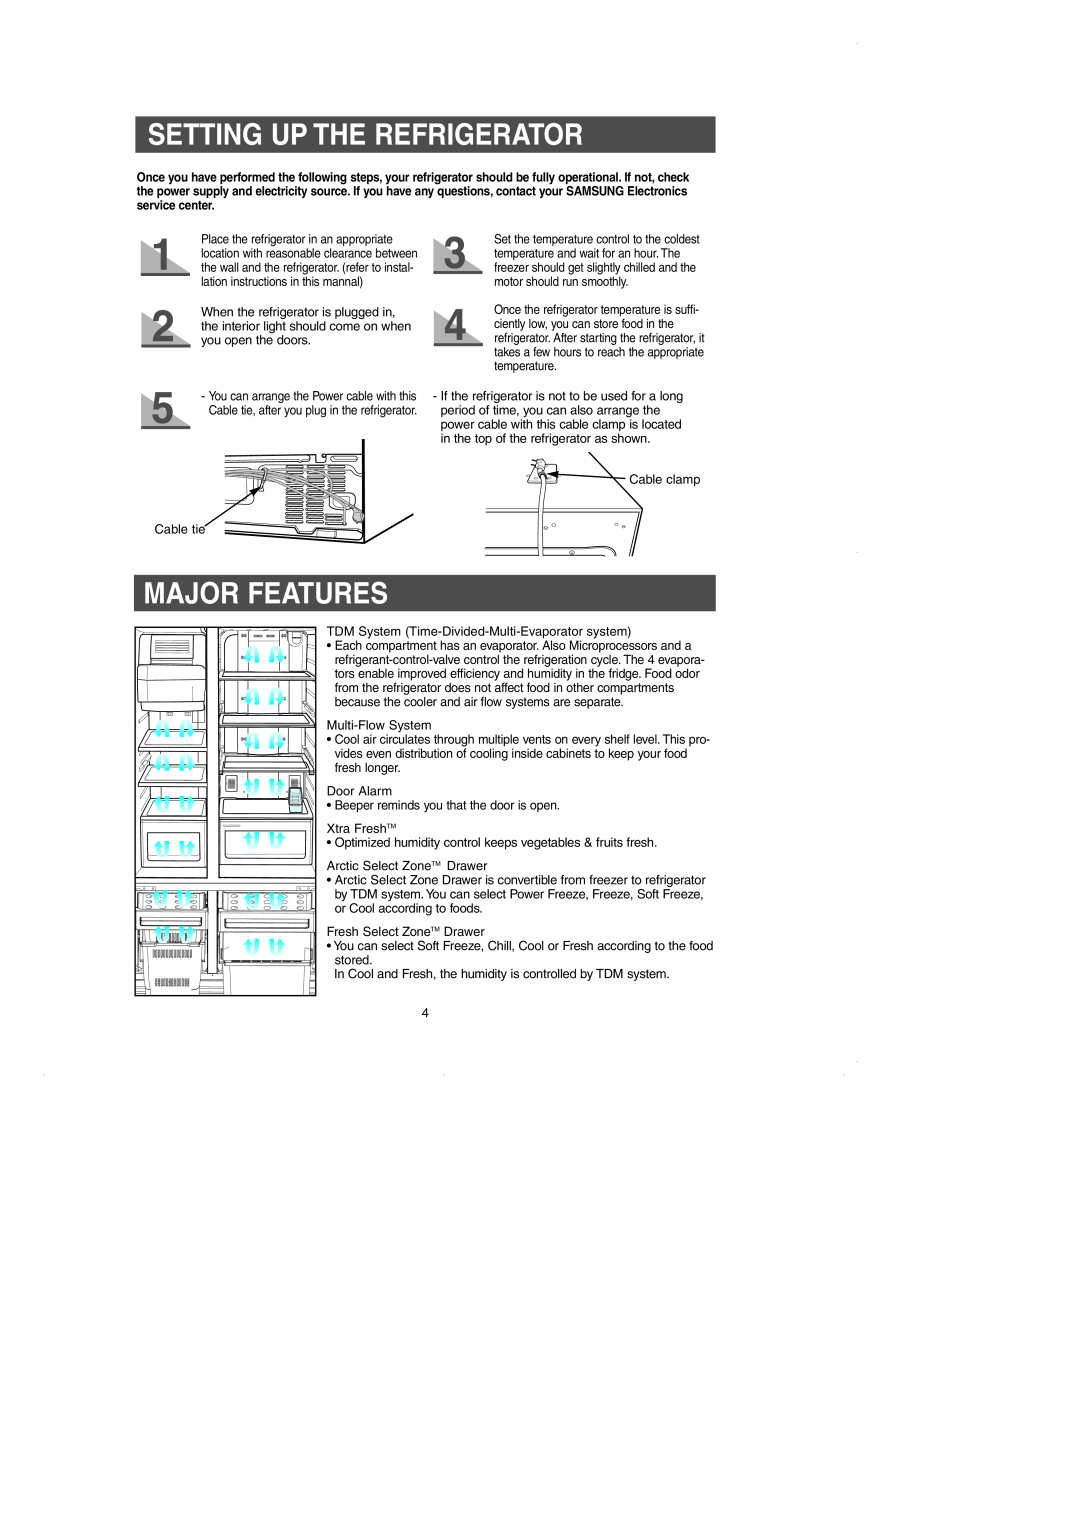 GE RM25 owner manual Setting Up The Refrigerator, Major Features 